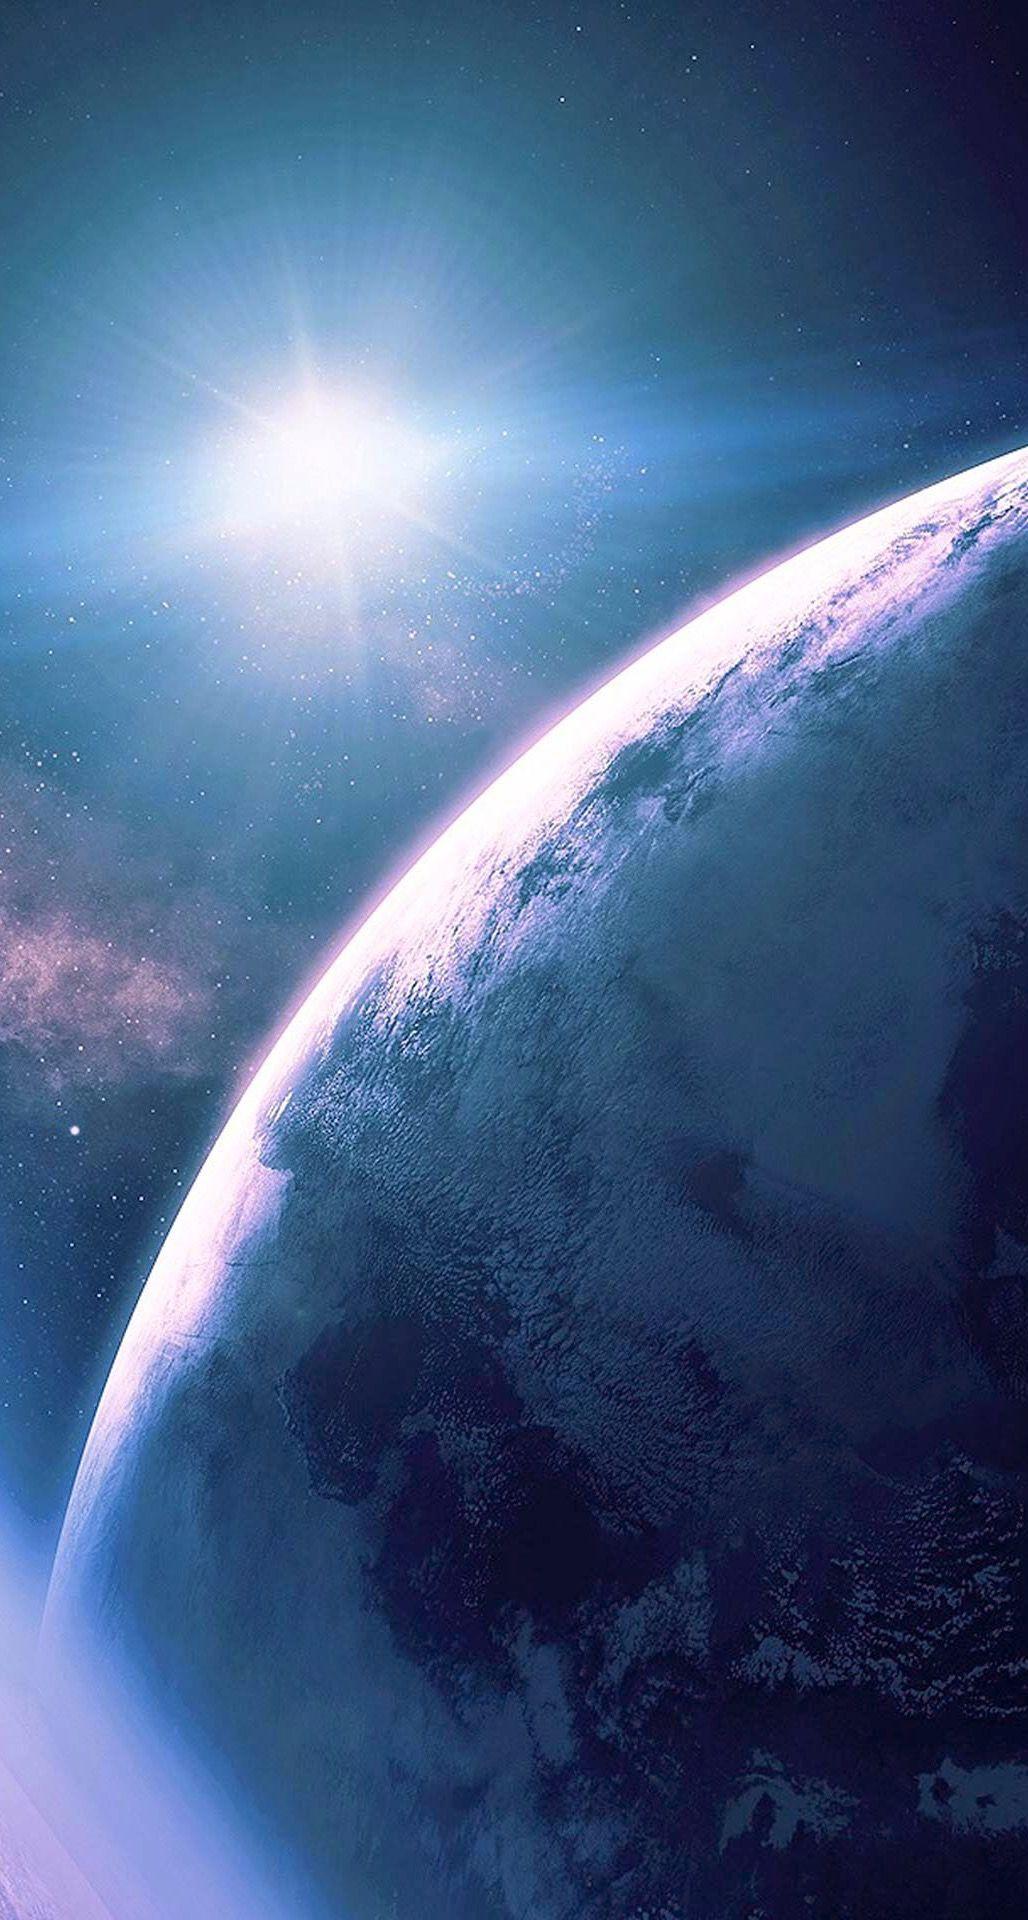 Planetary Iphone Wallpapers Top Free Planetary Iphone Backgrounds Wallpaperaccess 3601